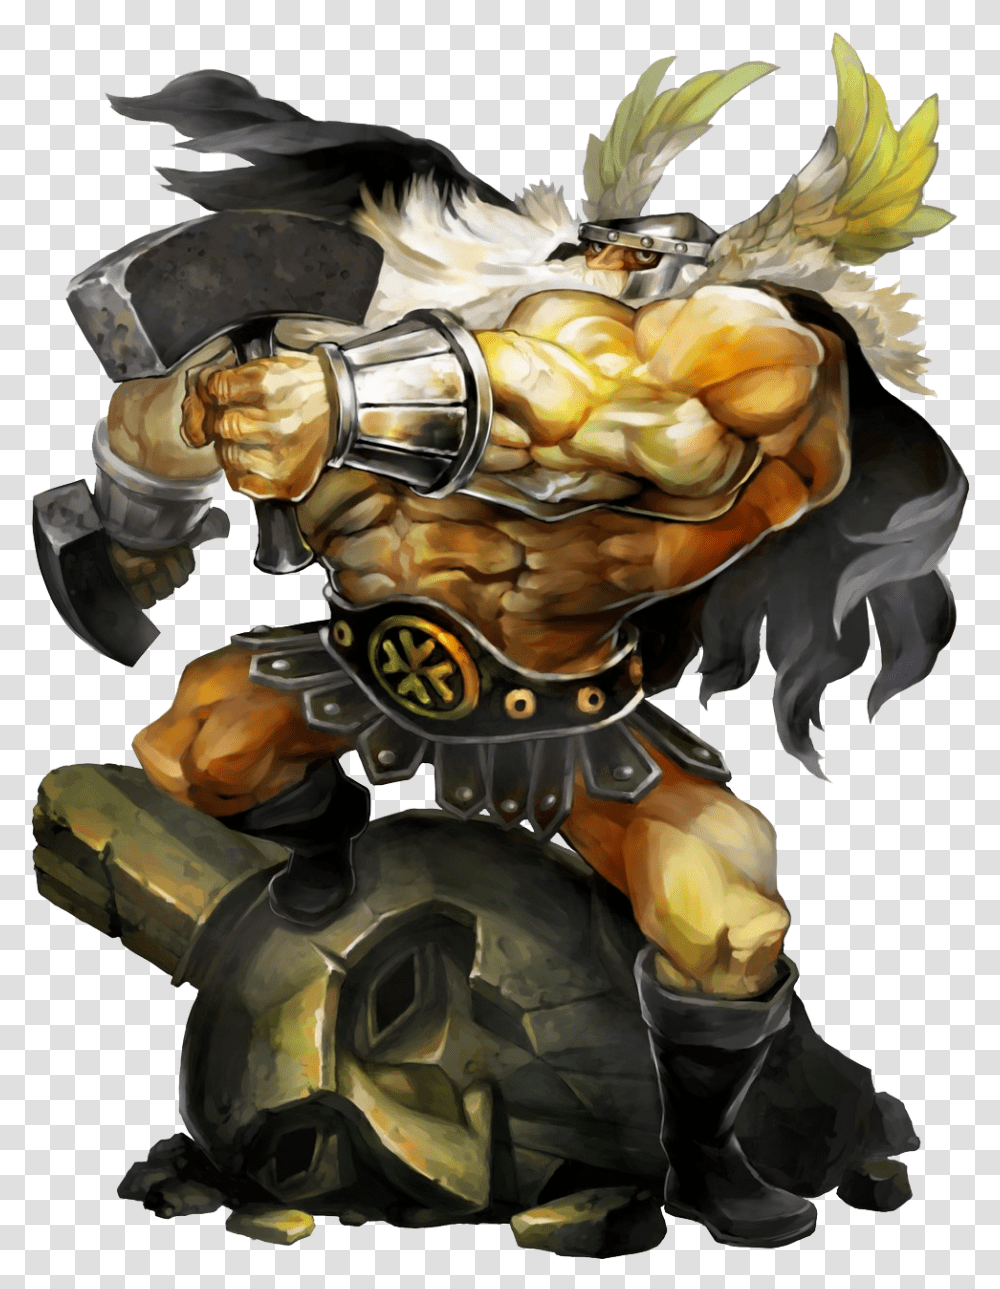 Dwarf Images All Crown Pro Dwarf, Person, Human, Overwatch, Sweets Transparent Png